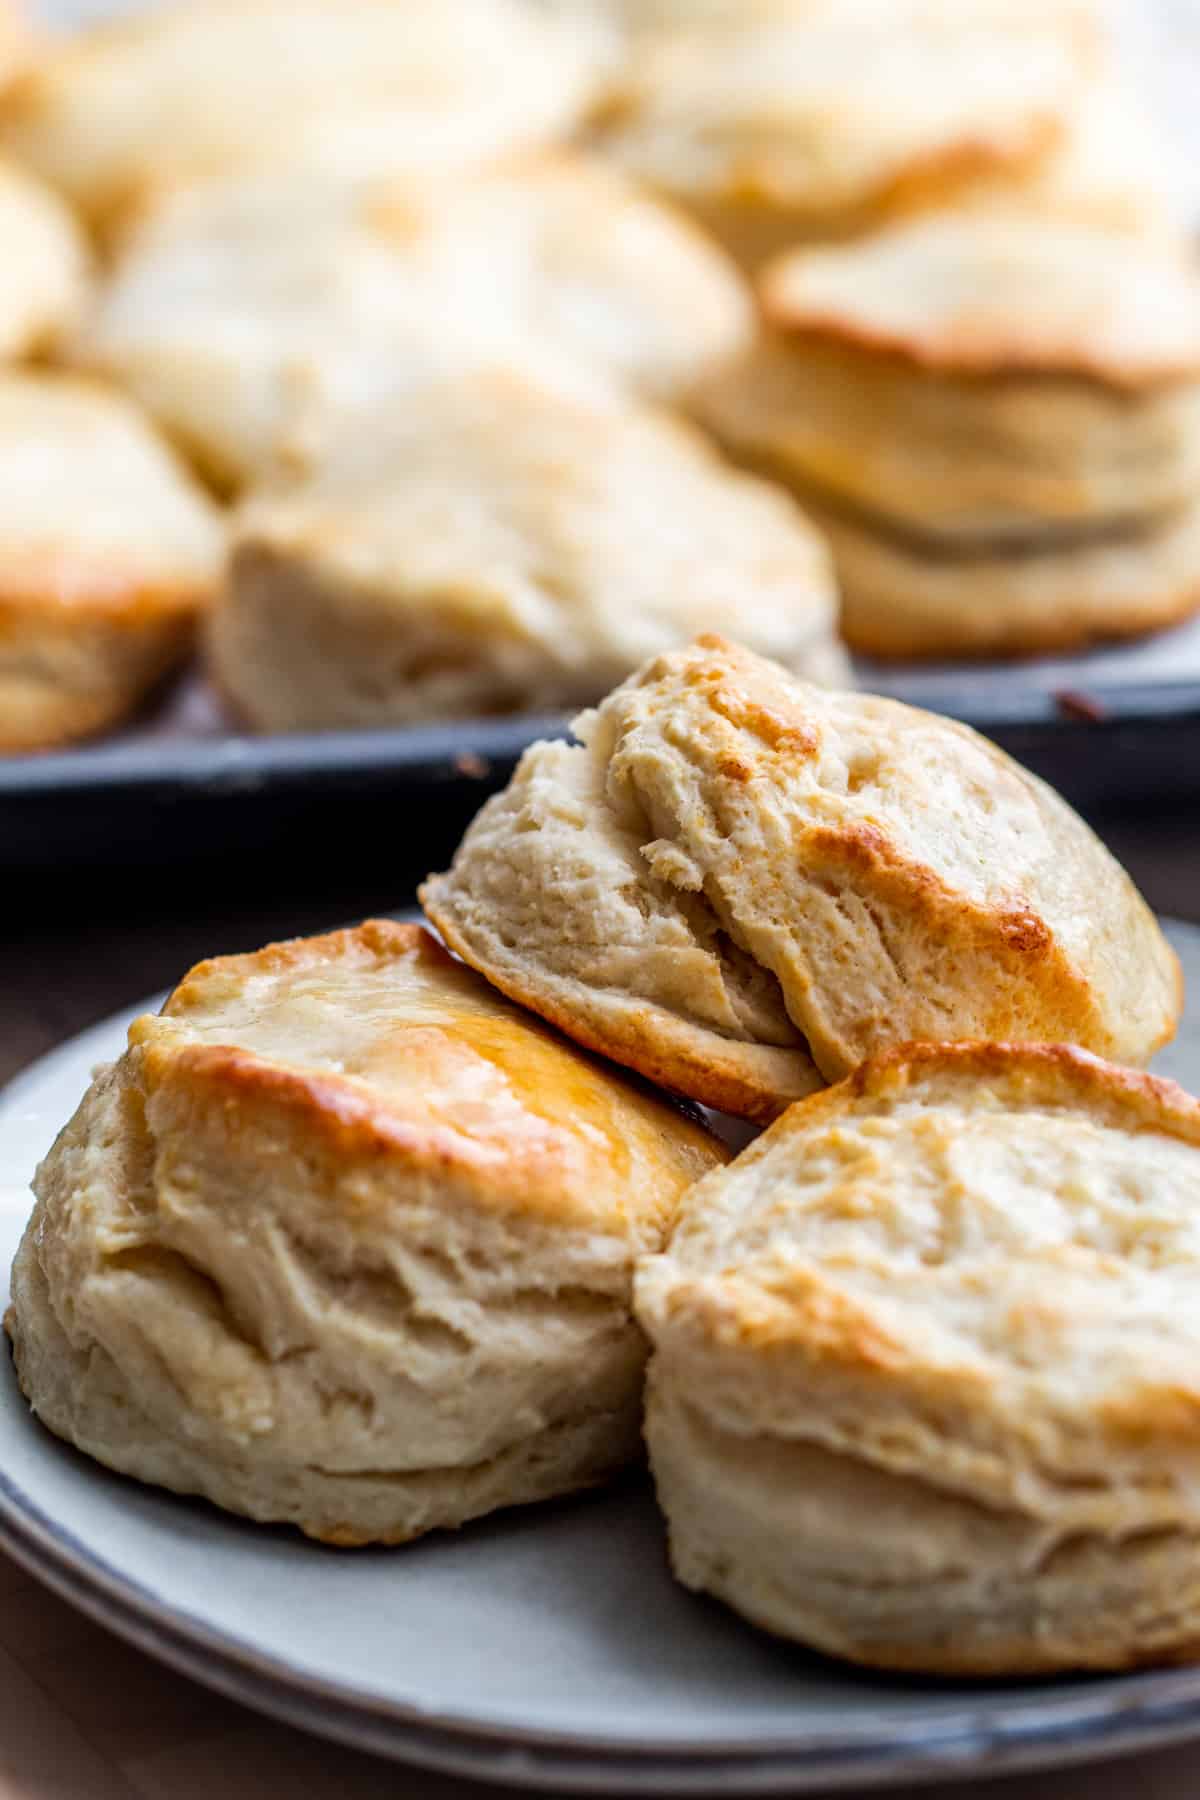 Biscuits sitting on gray plate with more on tray in background.